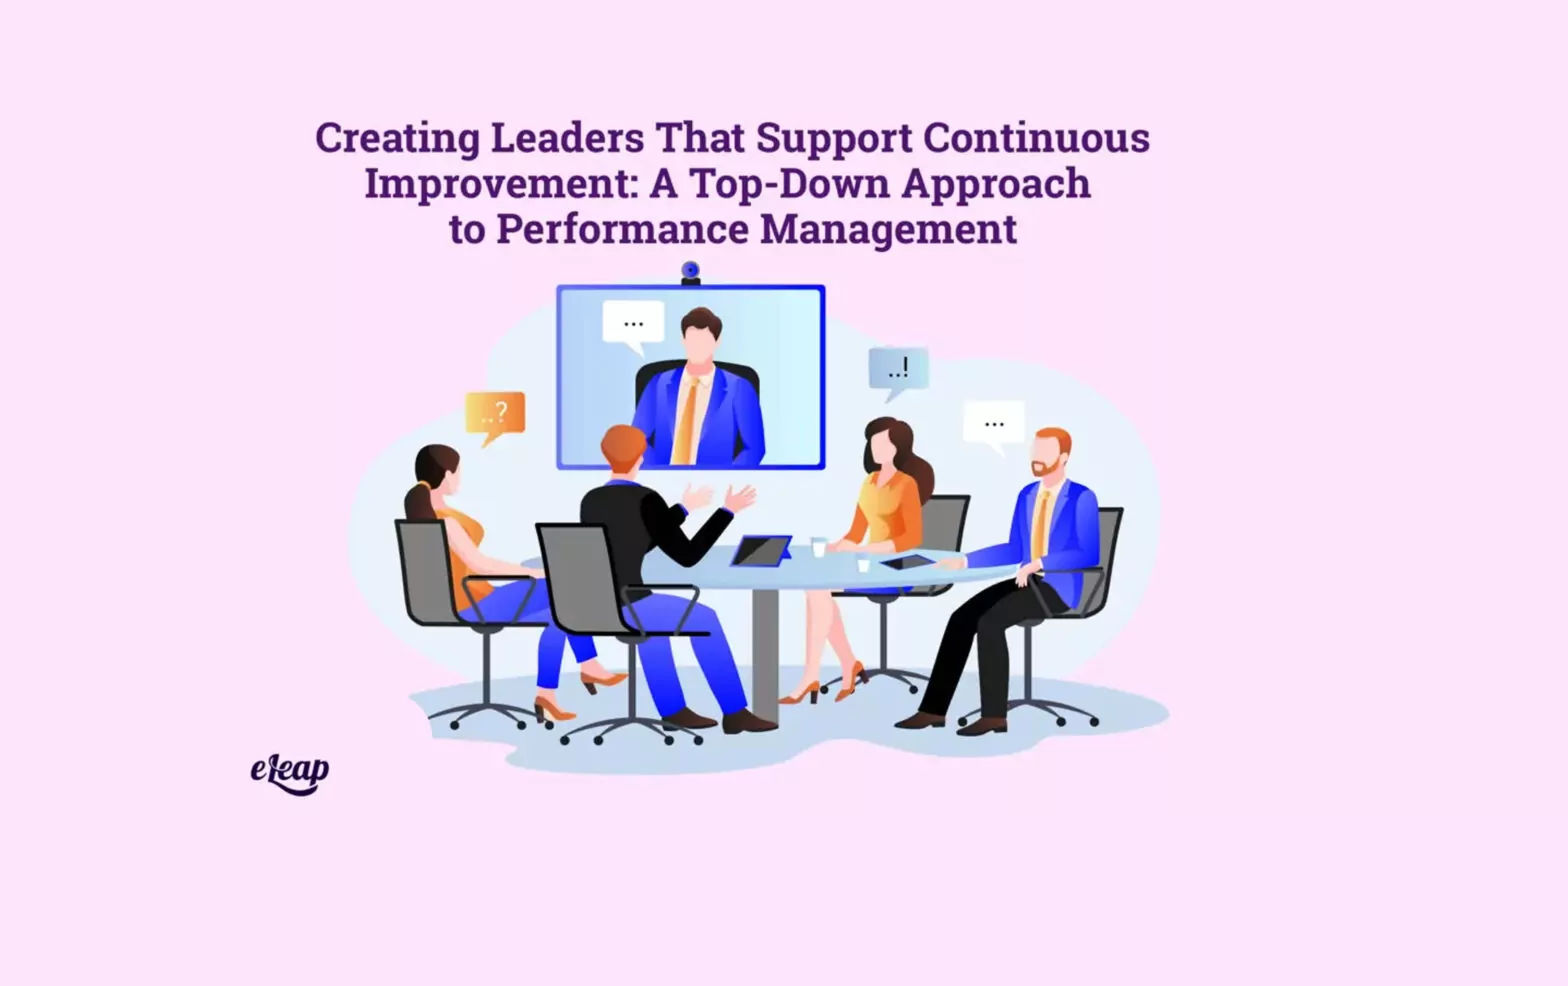 Creating Leaders That Support Continuous Improvement: A Top-Down Approach to Performance Management